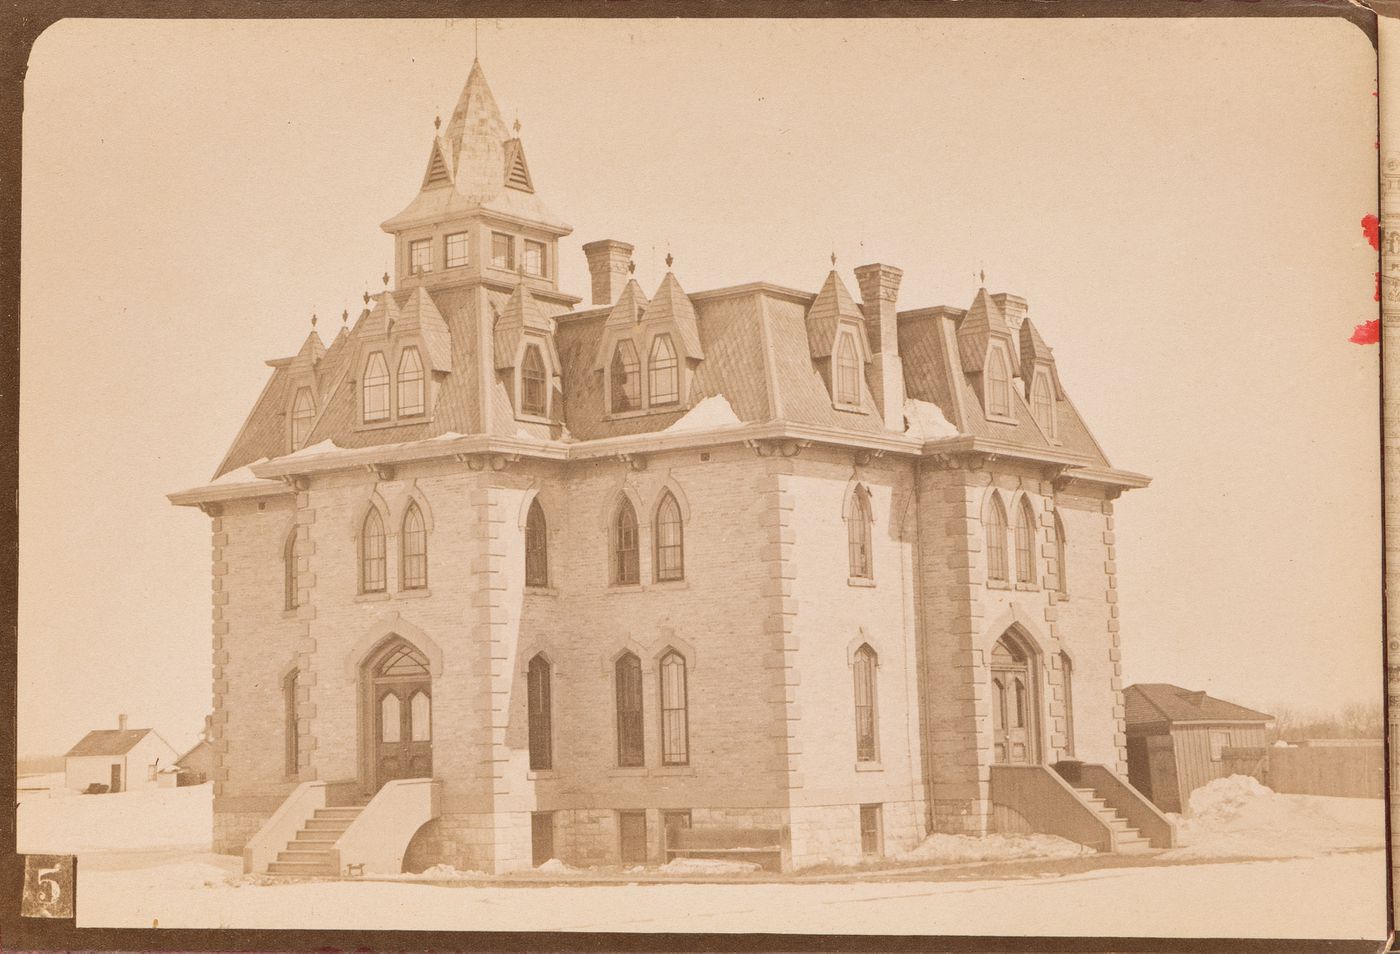 View of the principal and lateral façades of St. John's Ladies' School, Winnipeg, Manitoba, Canada